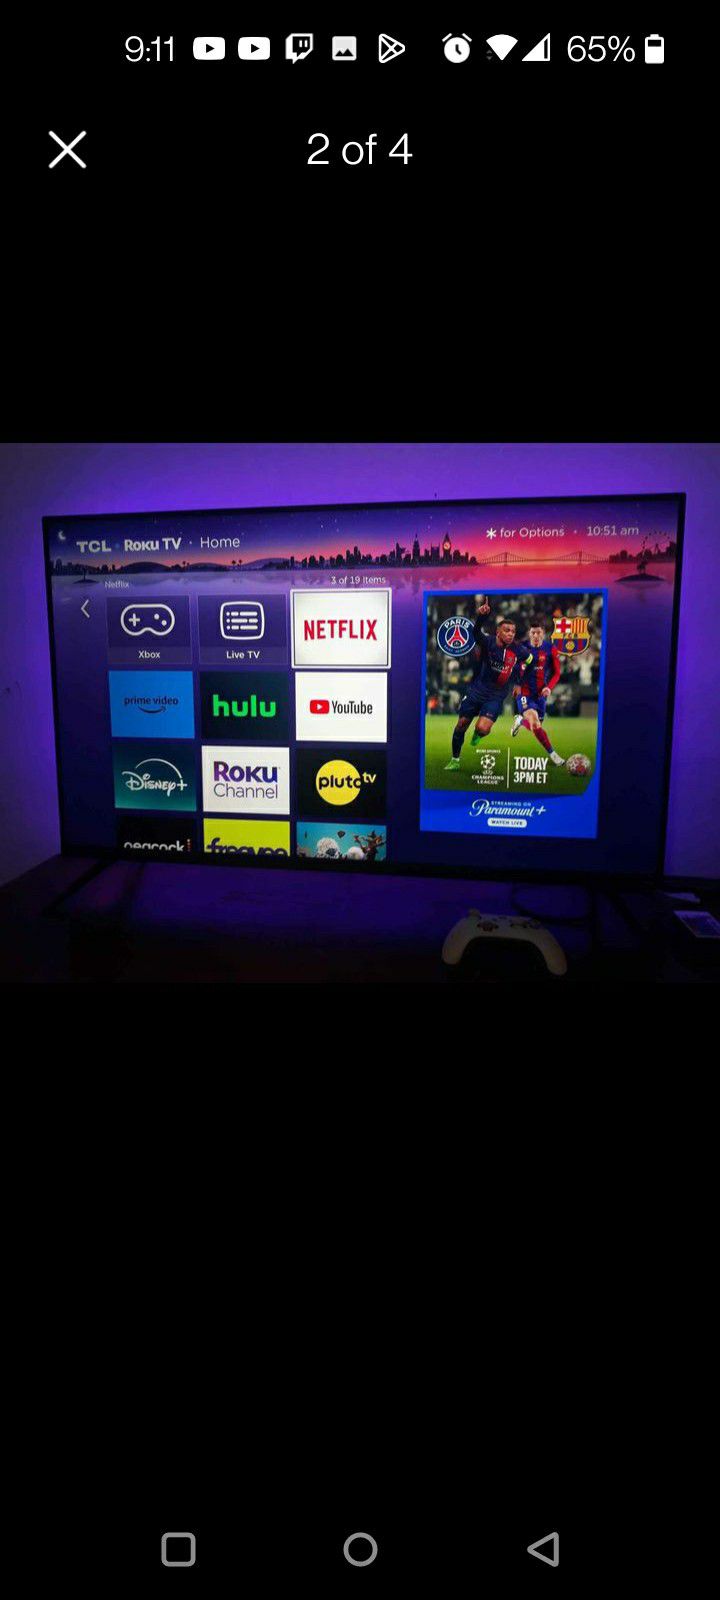 TCL 43s525 43'inch 4k Smart Tv 